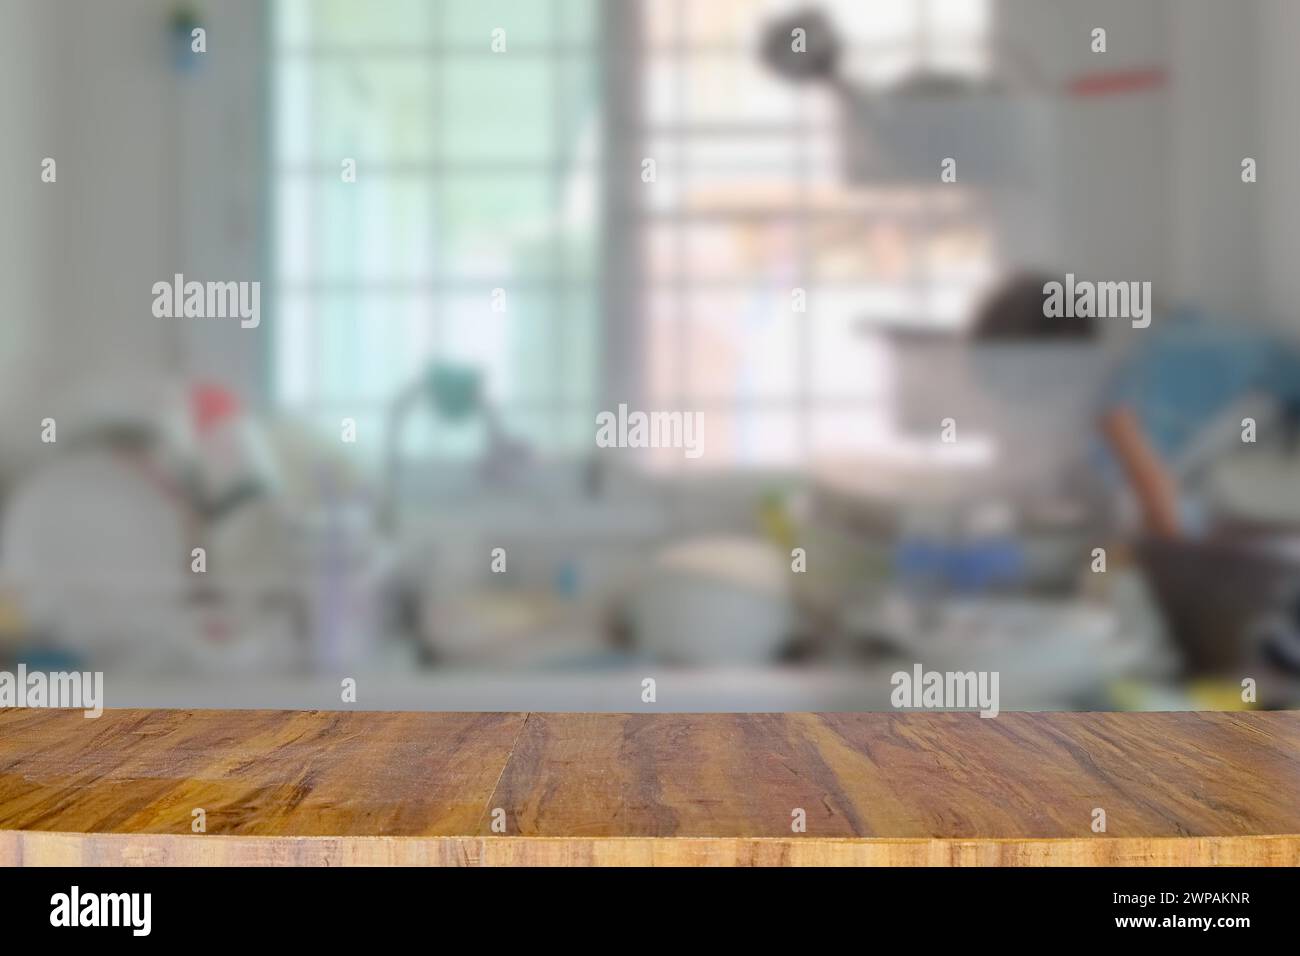 Empty wooden table top for place products and anything on blurred kitchen room background Stock Photo